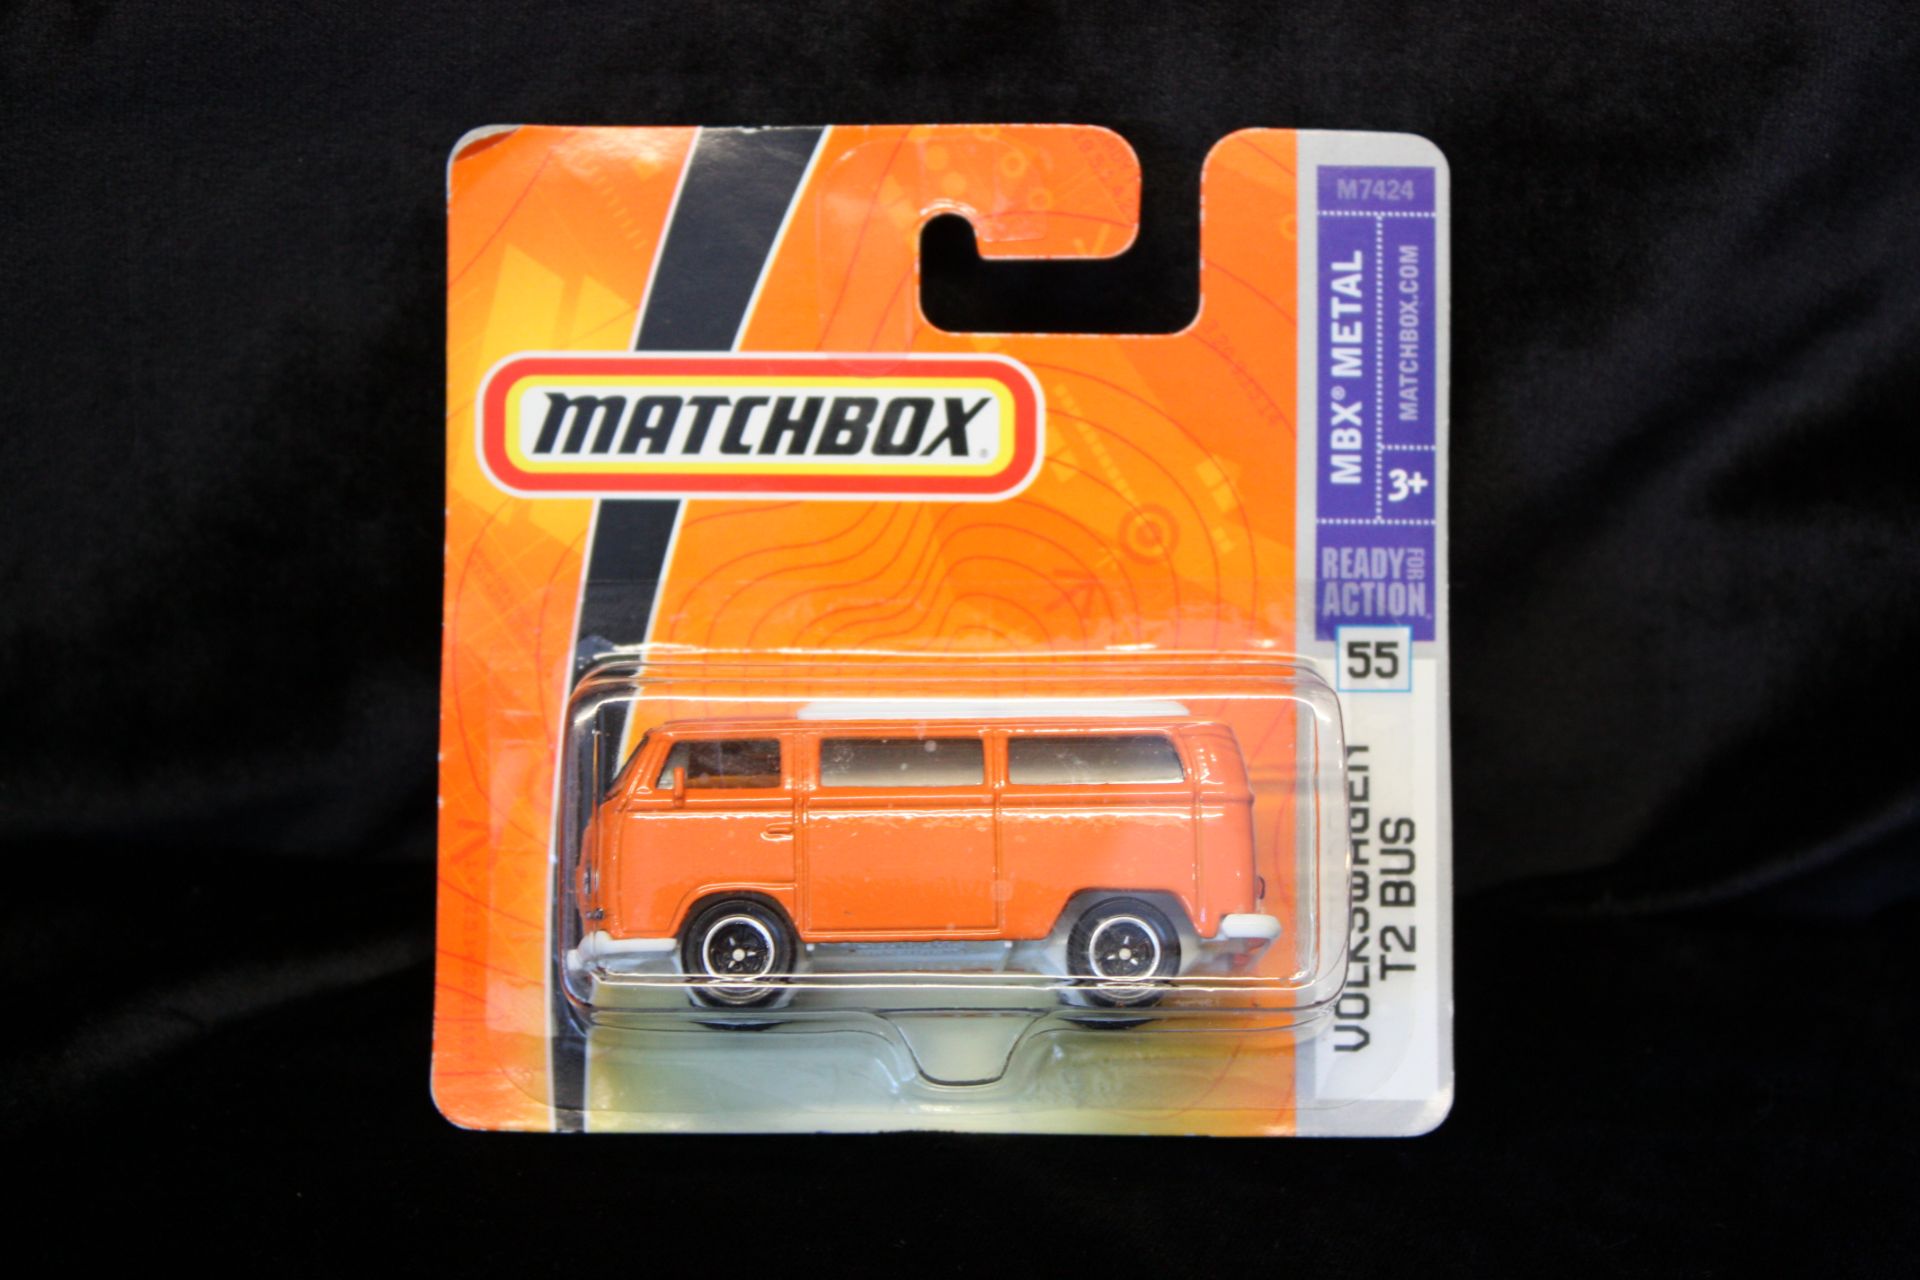 Matchbox Volkswagen T2 Bus - Orange. Model is part of an old private collection - All items are